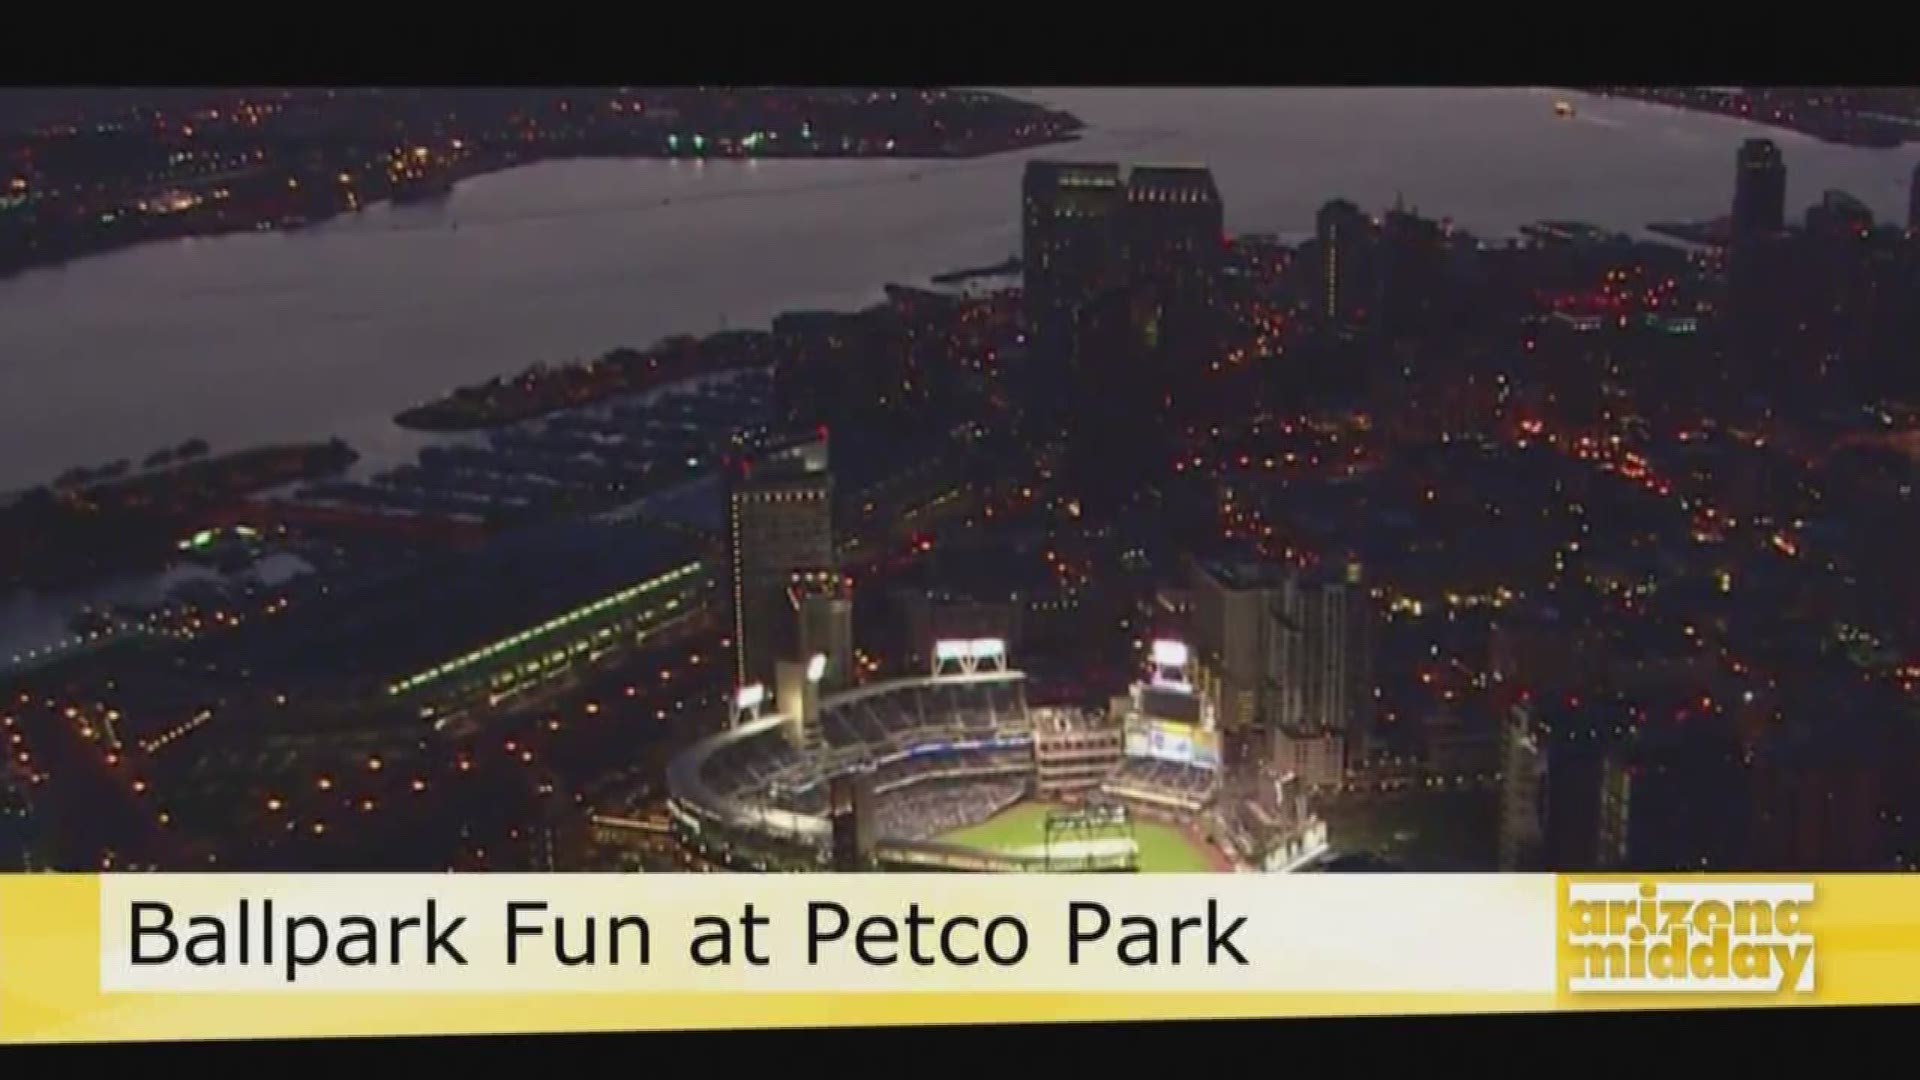 Katie Jackson with the San Diego Padres gives us the scoop on what makes Petco Park one of the most family friendly ballparks in the nation.